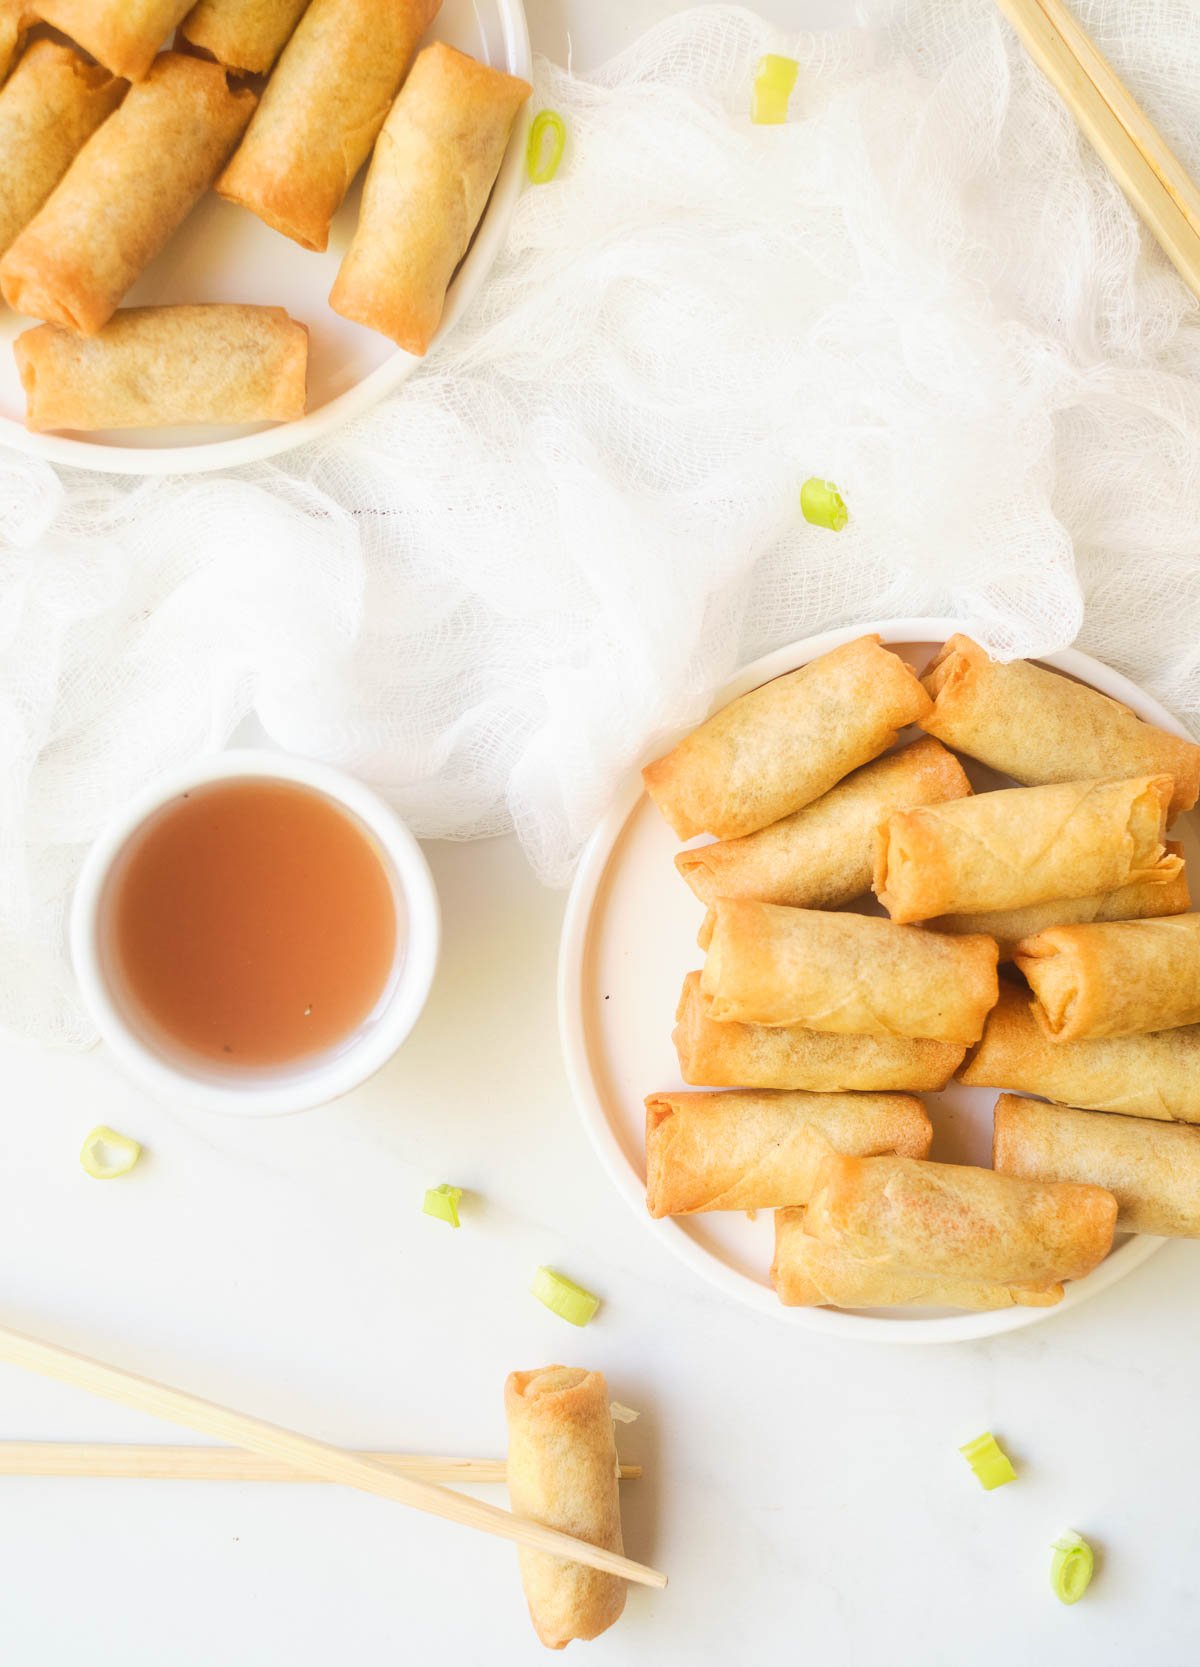 Spring rolls and dipping sauce.